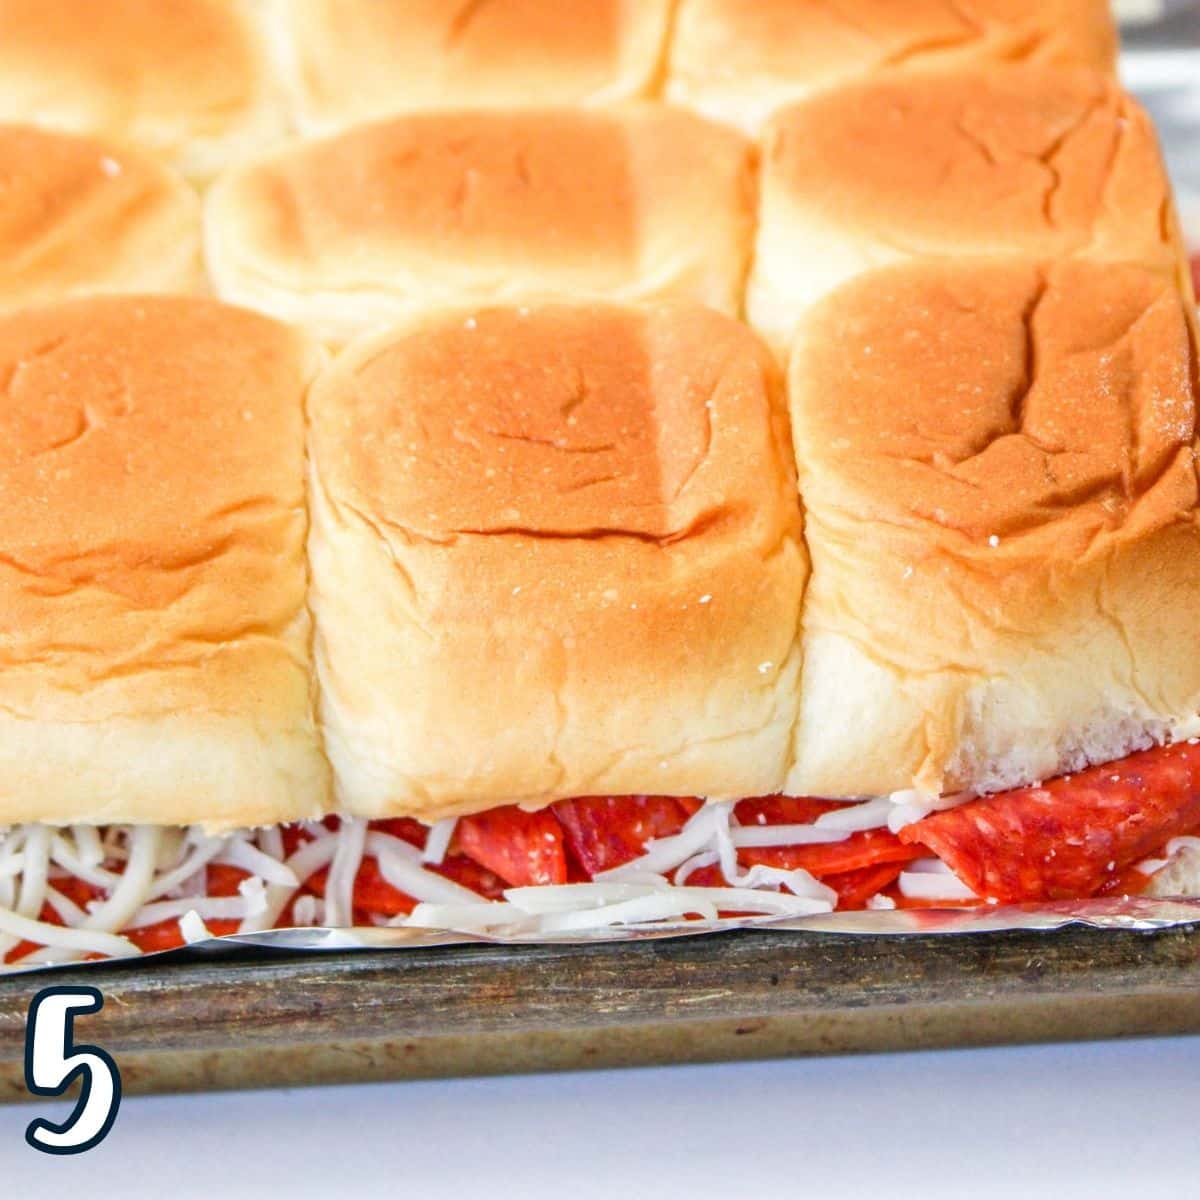 The dinner roll tops over the pizza sliders. 